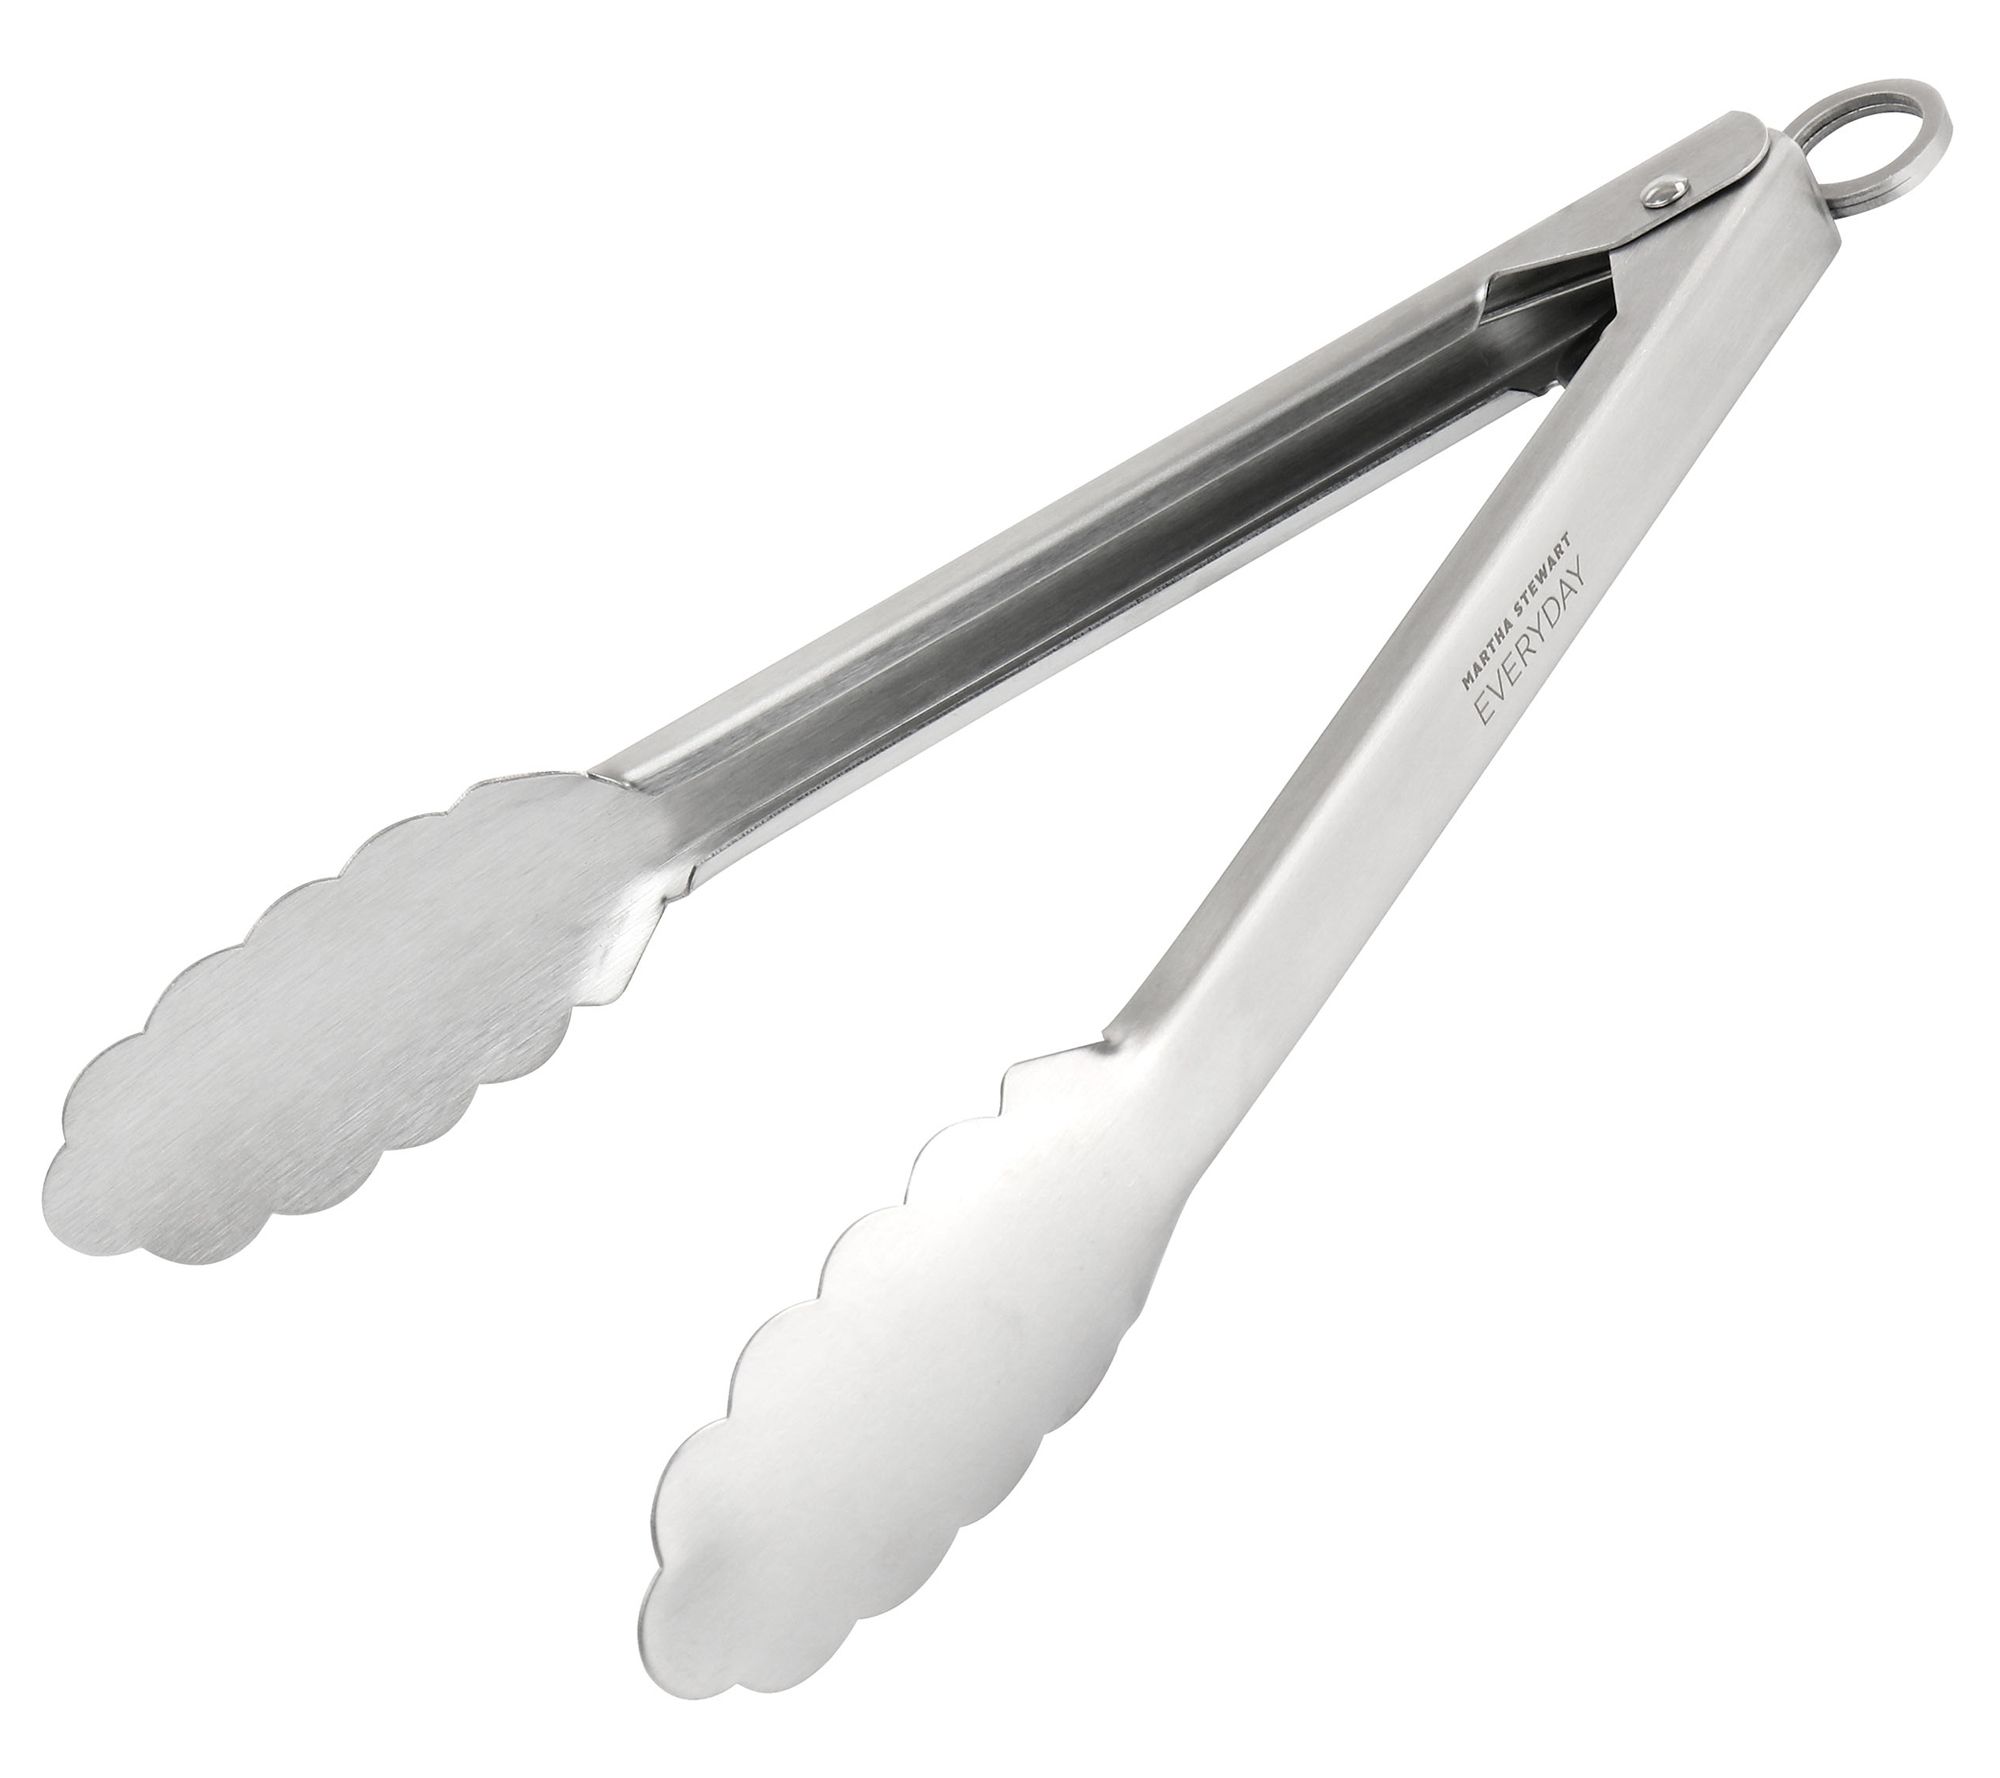 Choice 9 1/2 Black Coated Handle Stainless Steel Scalloped Tongs